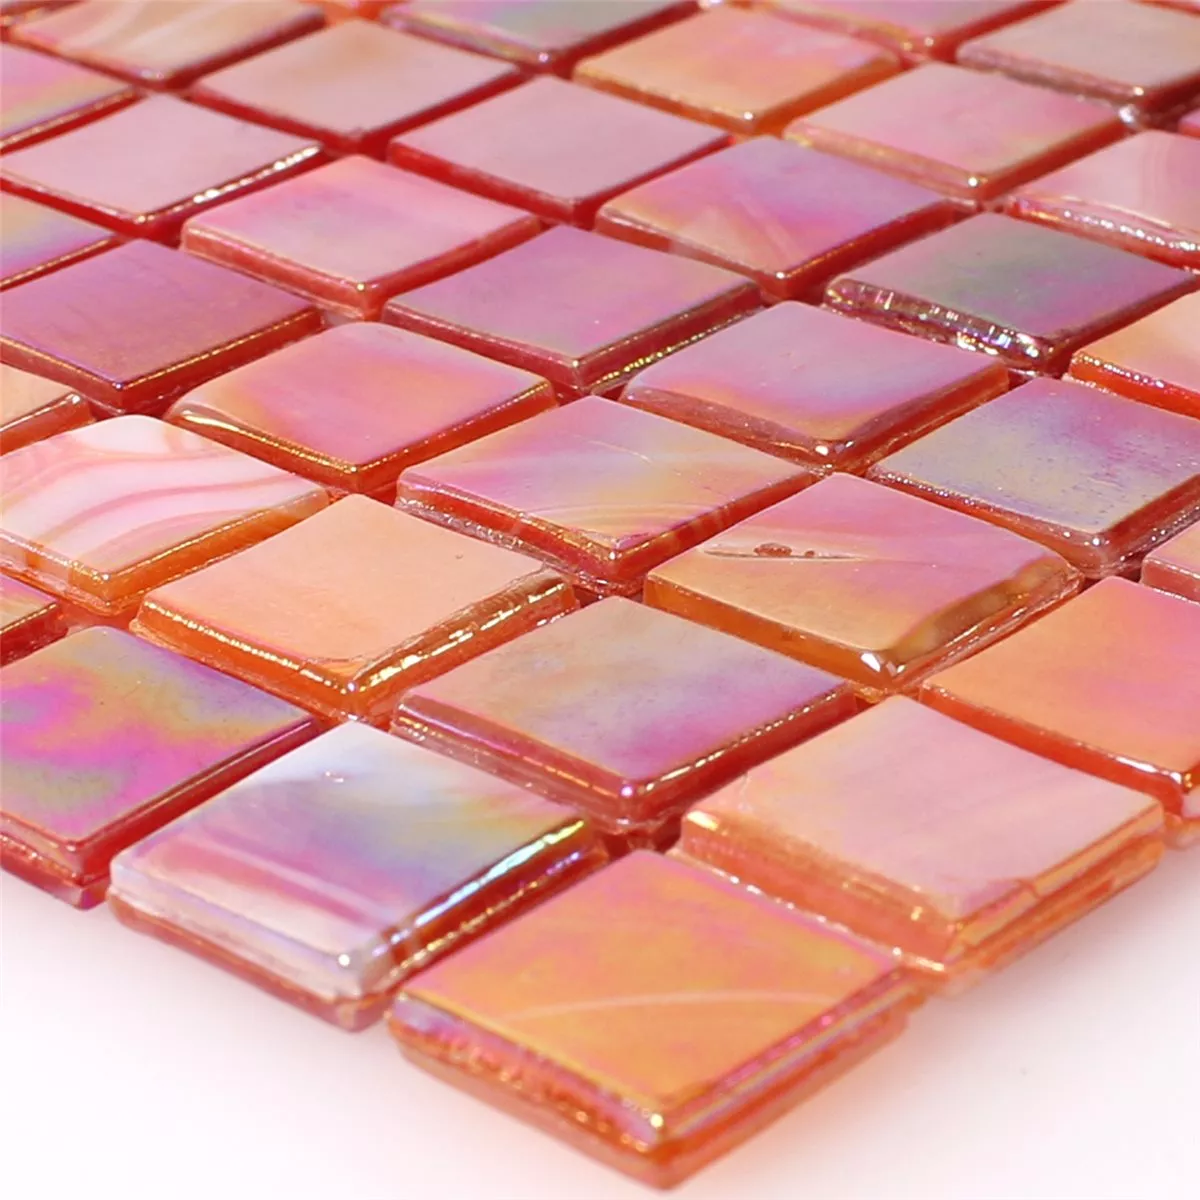 Sample Mosaic Tiles Glass Nacre Effect Red Mix